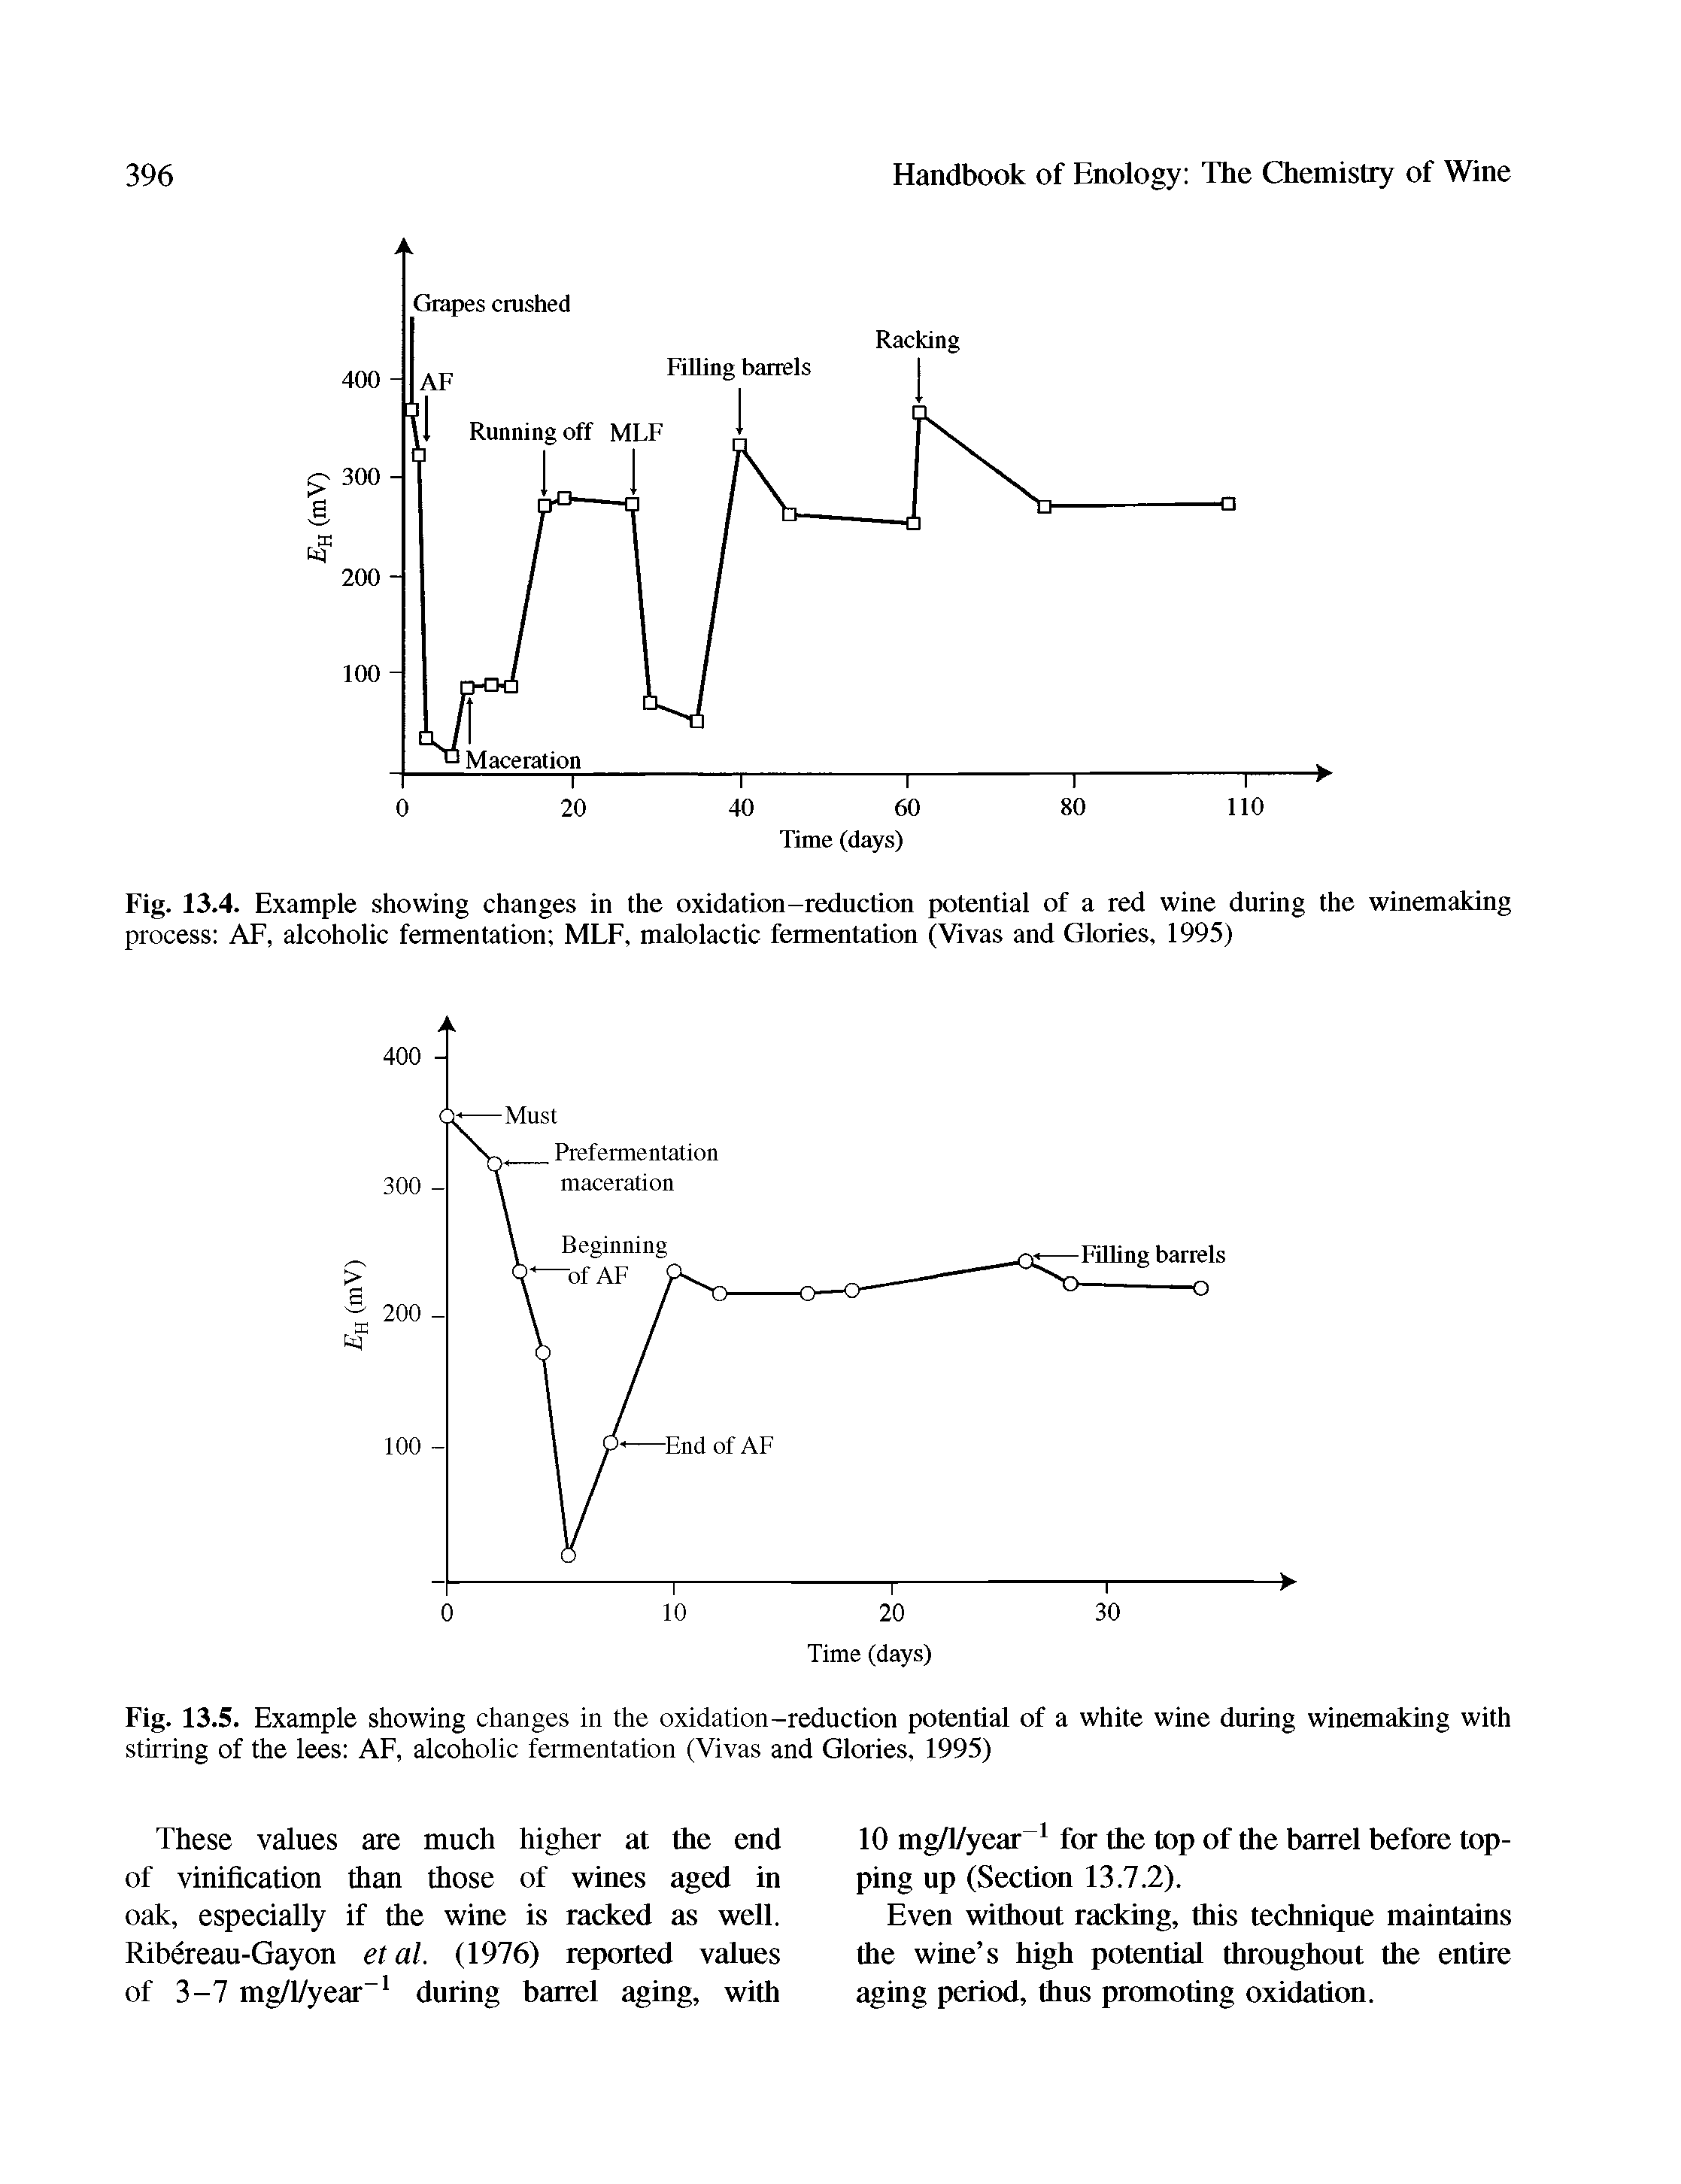 Fig. 13.4. Example showing changes in the oxidation-reduction potential of a red wine during the winemaking process AF, alcoholic fermentation MLF, malolactic fermentation (Vivas and Glories, 1995)...